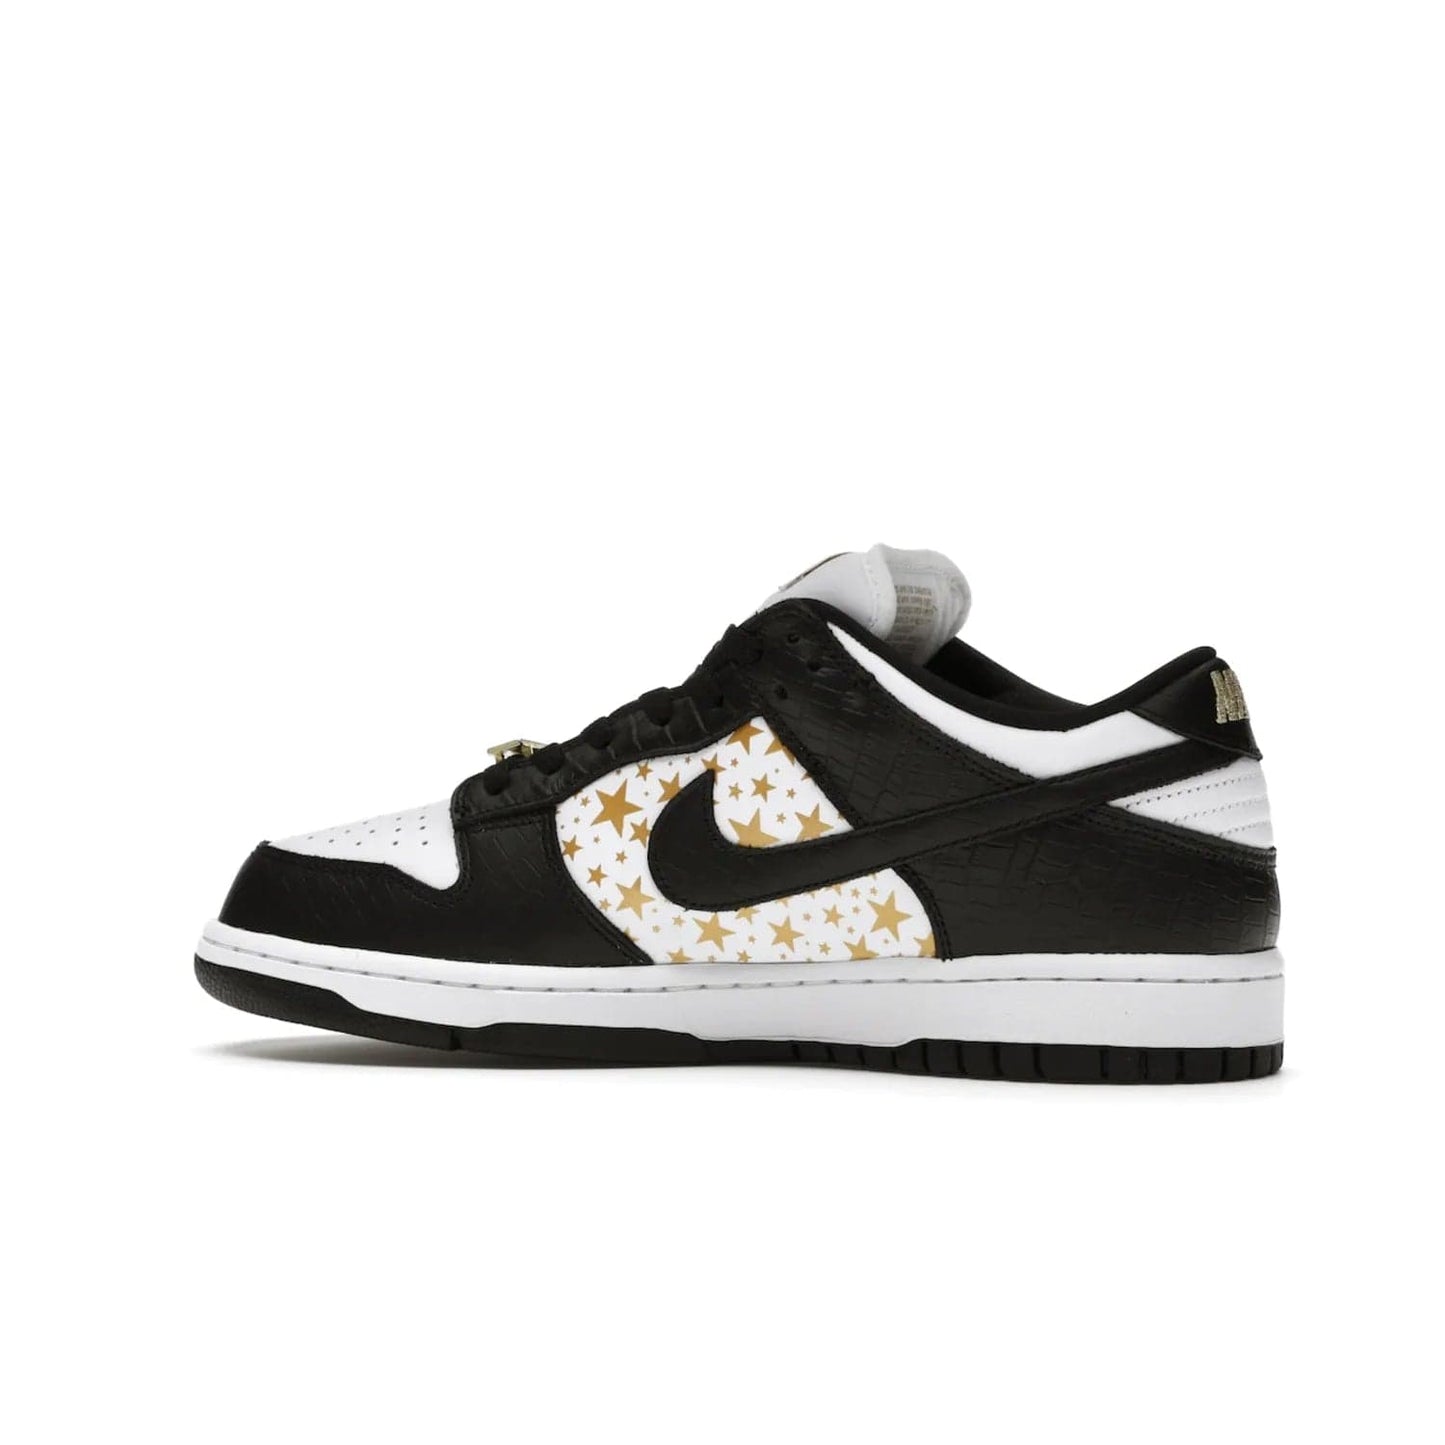 Nike SB Dunk Low Supreme Stars Black (2021) - Image 21 - Only at www.BallersClubKickz.com - Retro style and signature details make the Nike SB Dunk Low Supreme Black a must-have. This special edition shoe features a white leather upper and black croc skin overlays complemented by gold stars and deubré. Enjoy a piece of SB history and grab yours today.